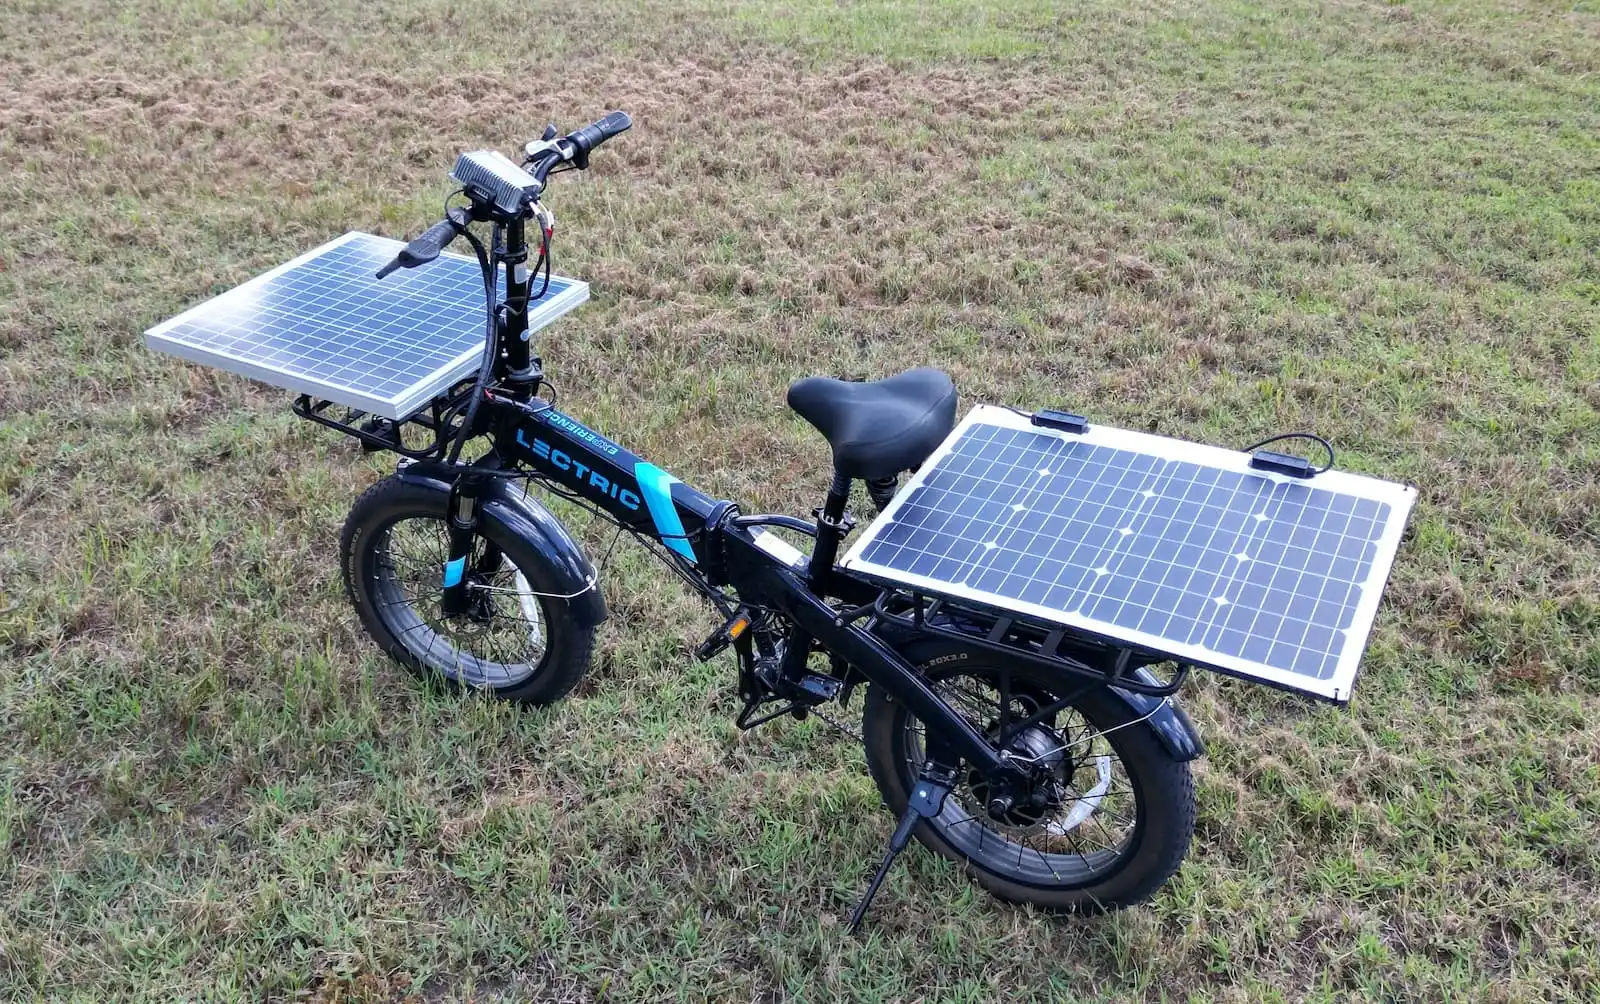 Ebike equipped with solar panels on the racks